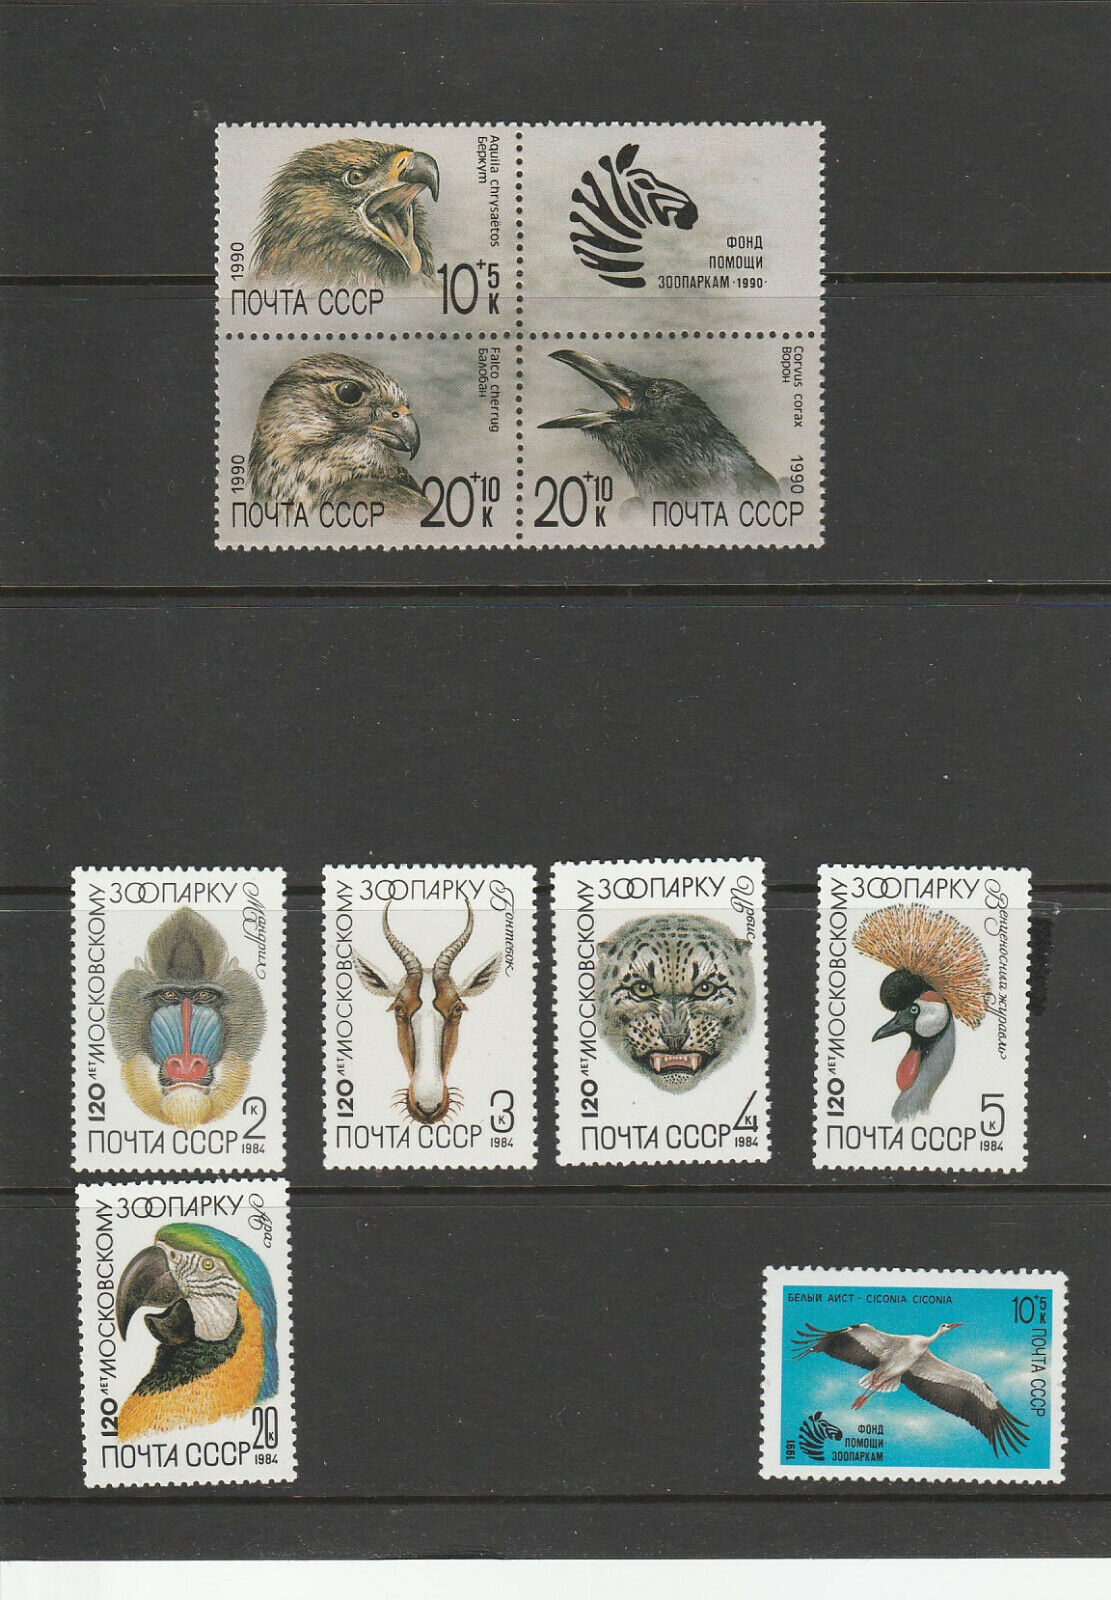  ANIMALS AND BIRDS IN ZOOS 1984 -1991 4 SETS OF STAMPS Без бренда - фотография #2